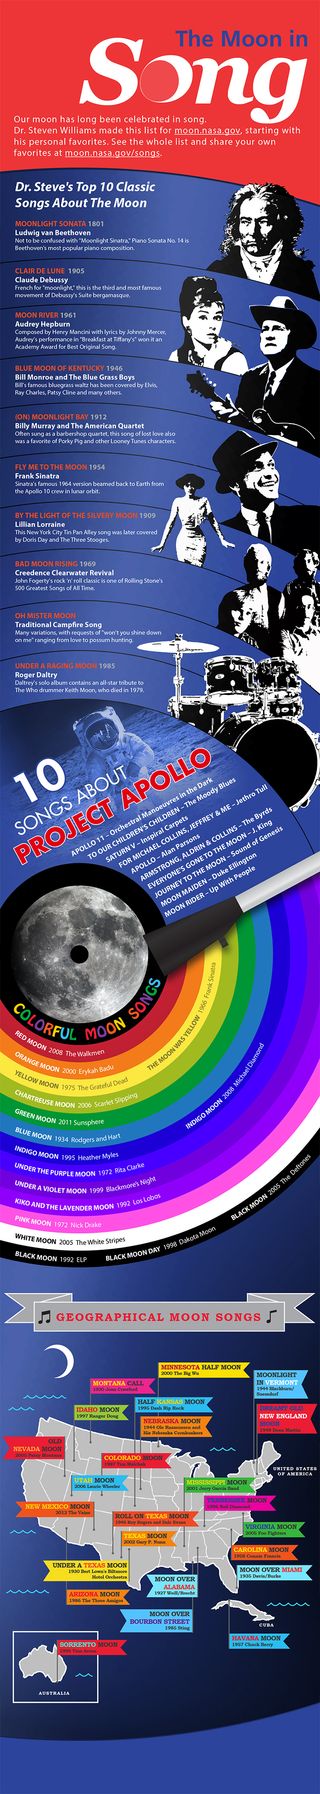 NASA's Steven Williams listed classic, colorful and geography-based moon songs in an infographic for the Planetary Science Division. You can learn more about the moon in song by NASA at: http://moon.nasa.gov/moonsongs.cfm.